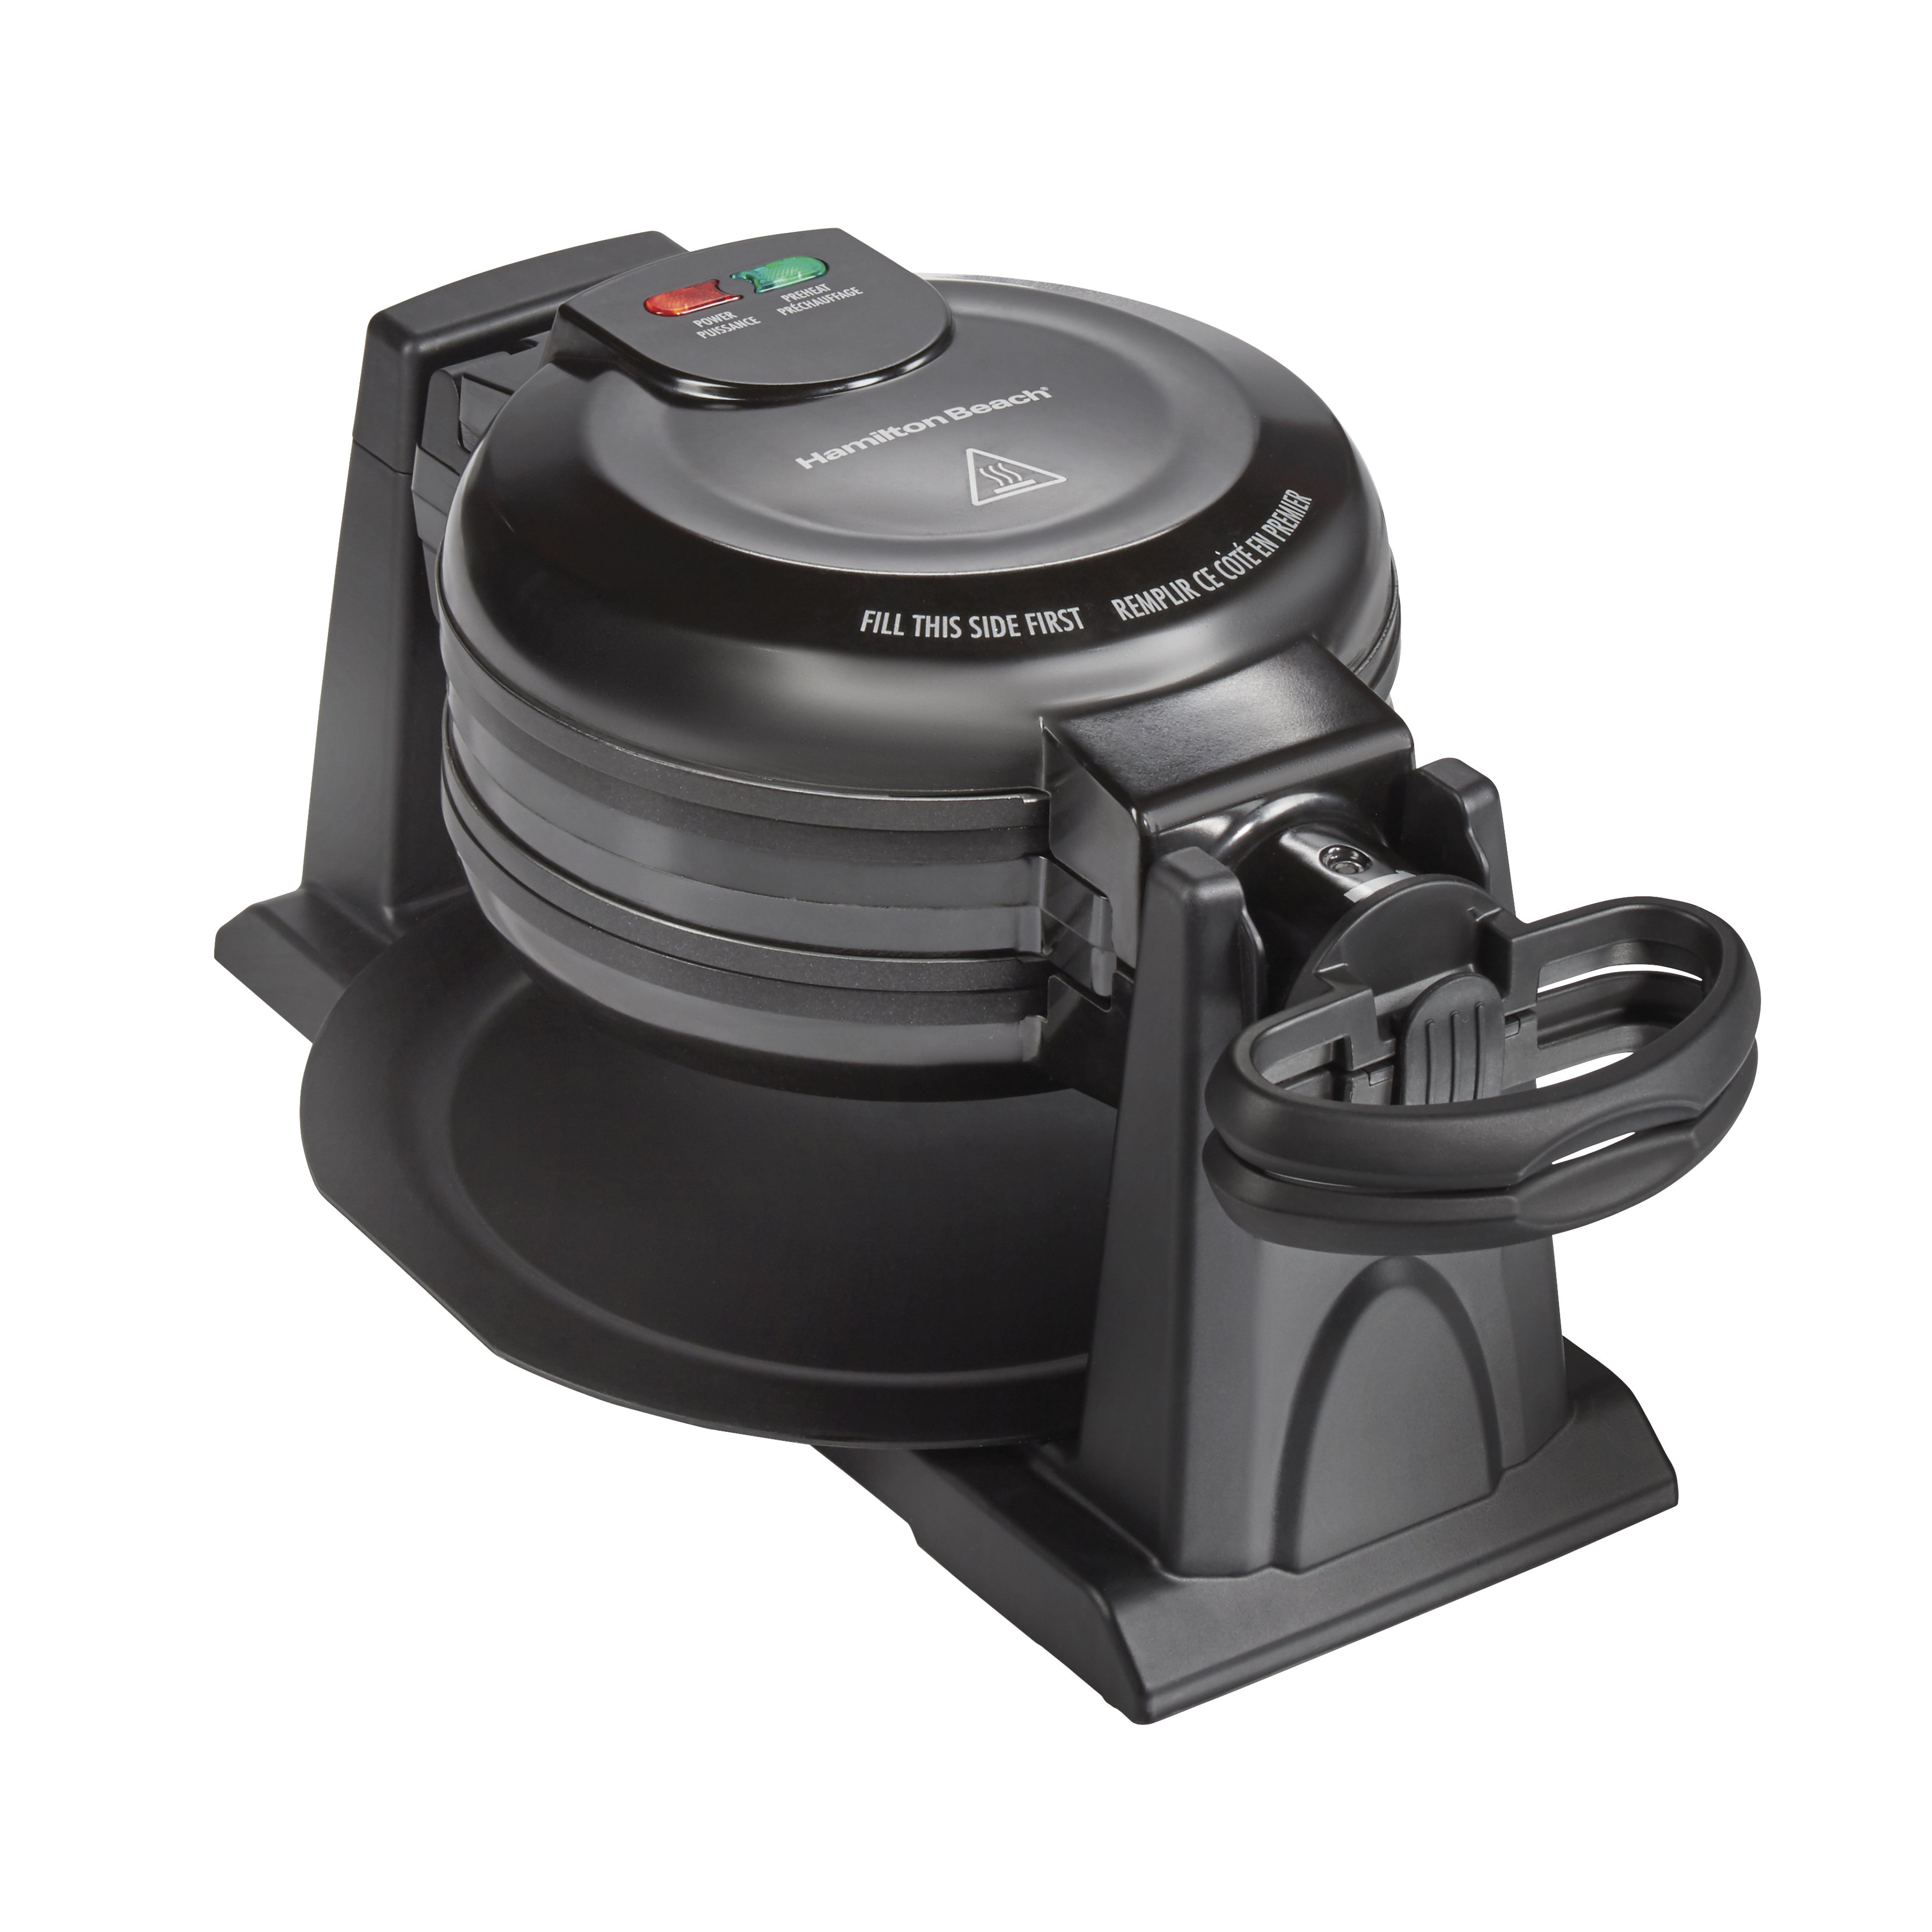 Black and Decker Double Flip Waffle Maker (WMD200B) Review 